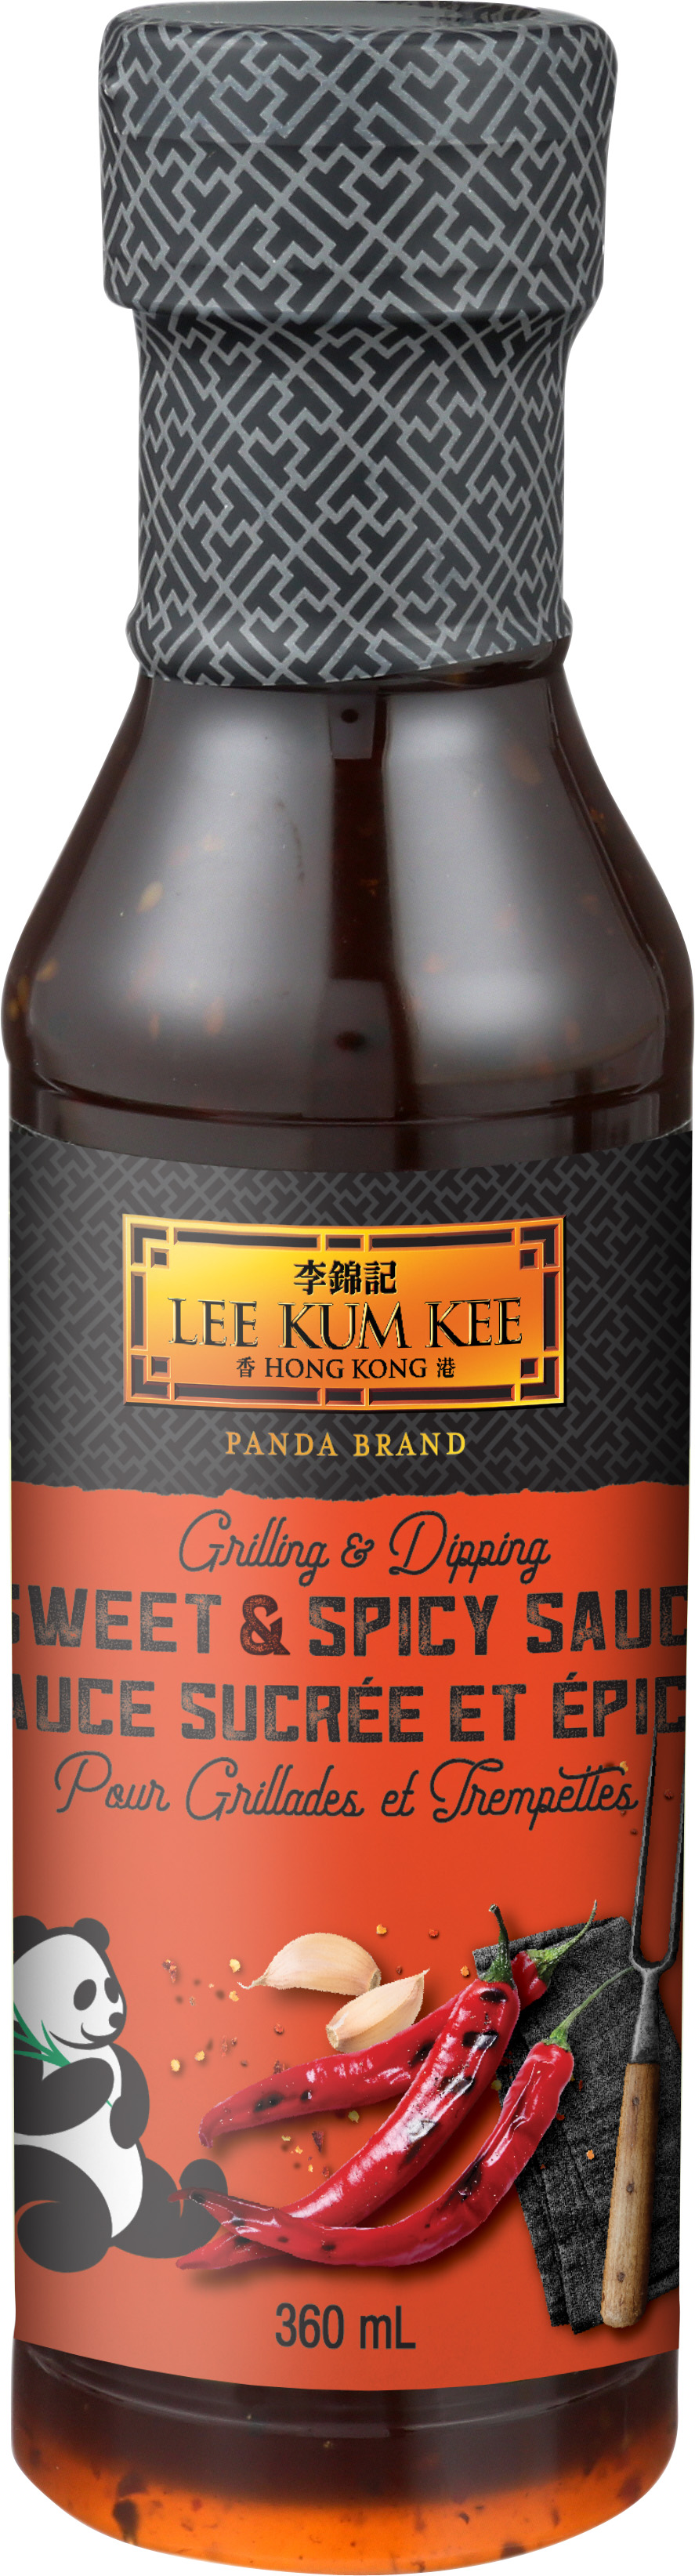 Panda Brand Sweet & Spicy Grilling & Dipping Sauce 360mL